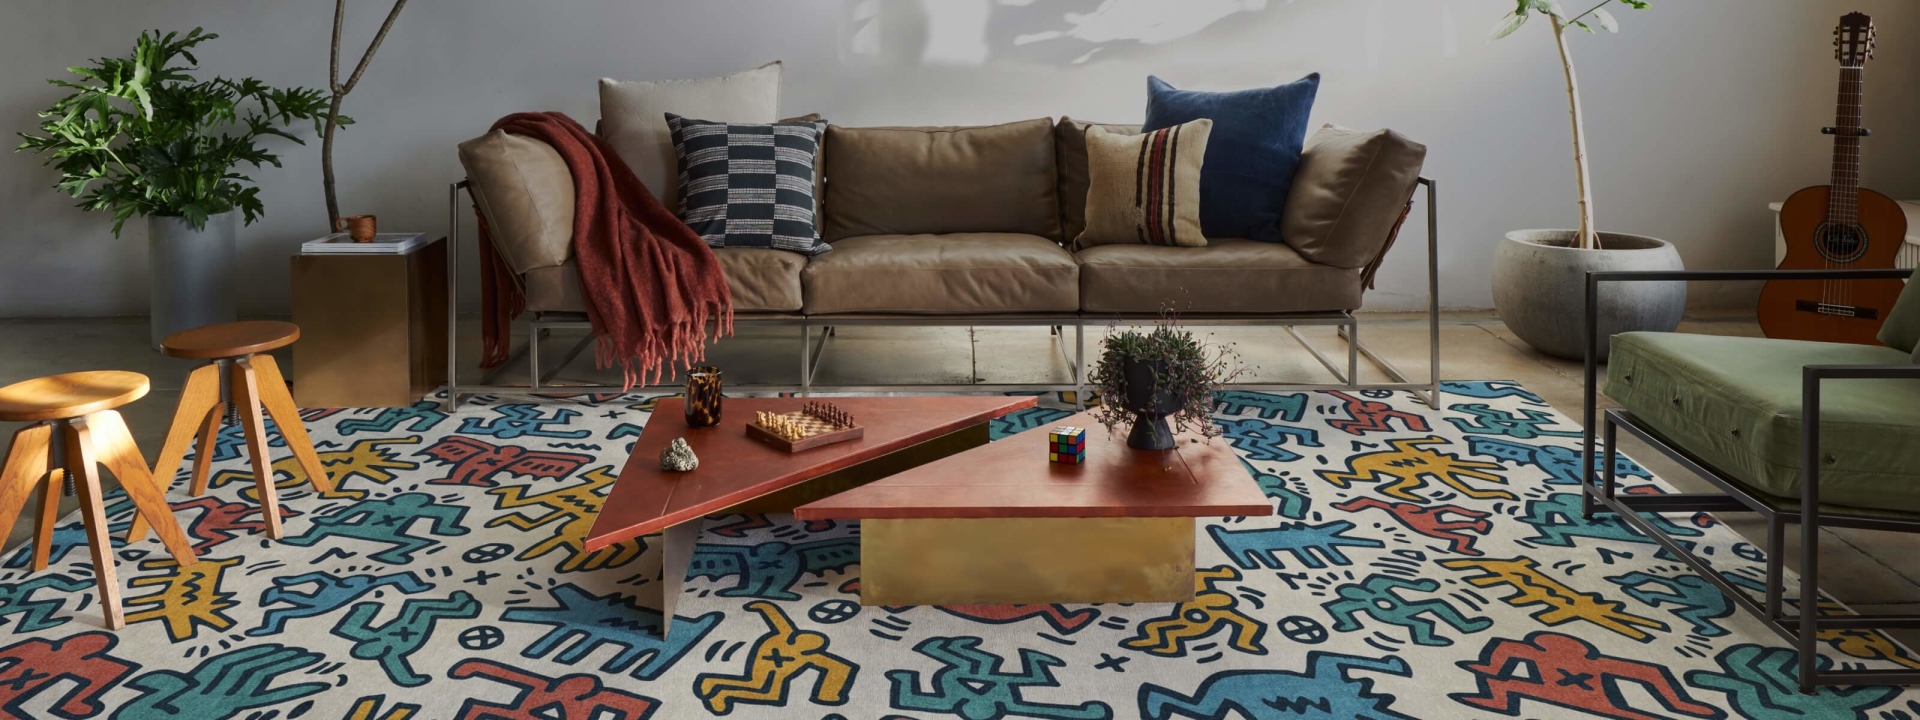 Ruggable Launches Keith Haring Collection of Rugs & Doormats